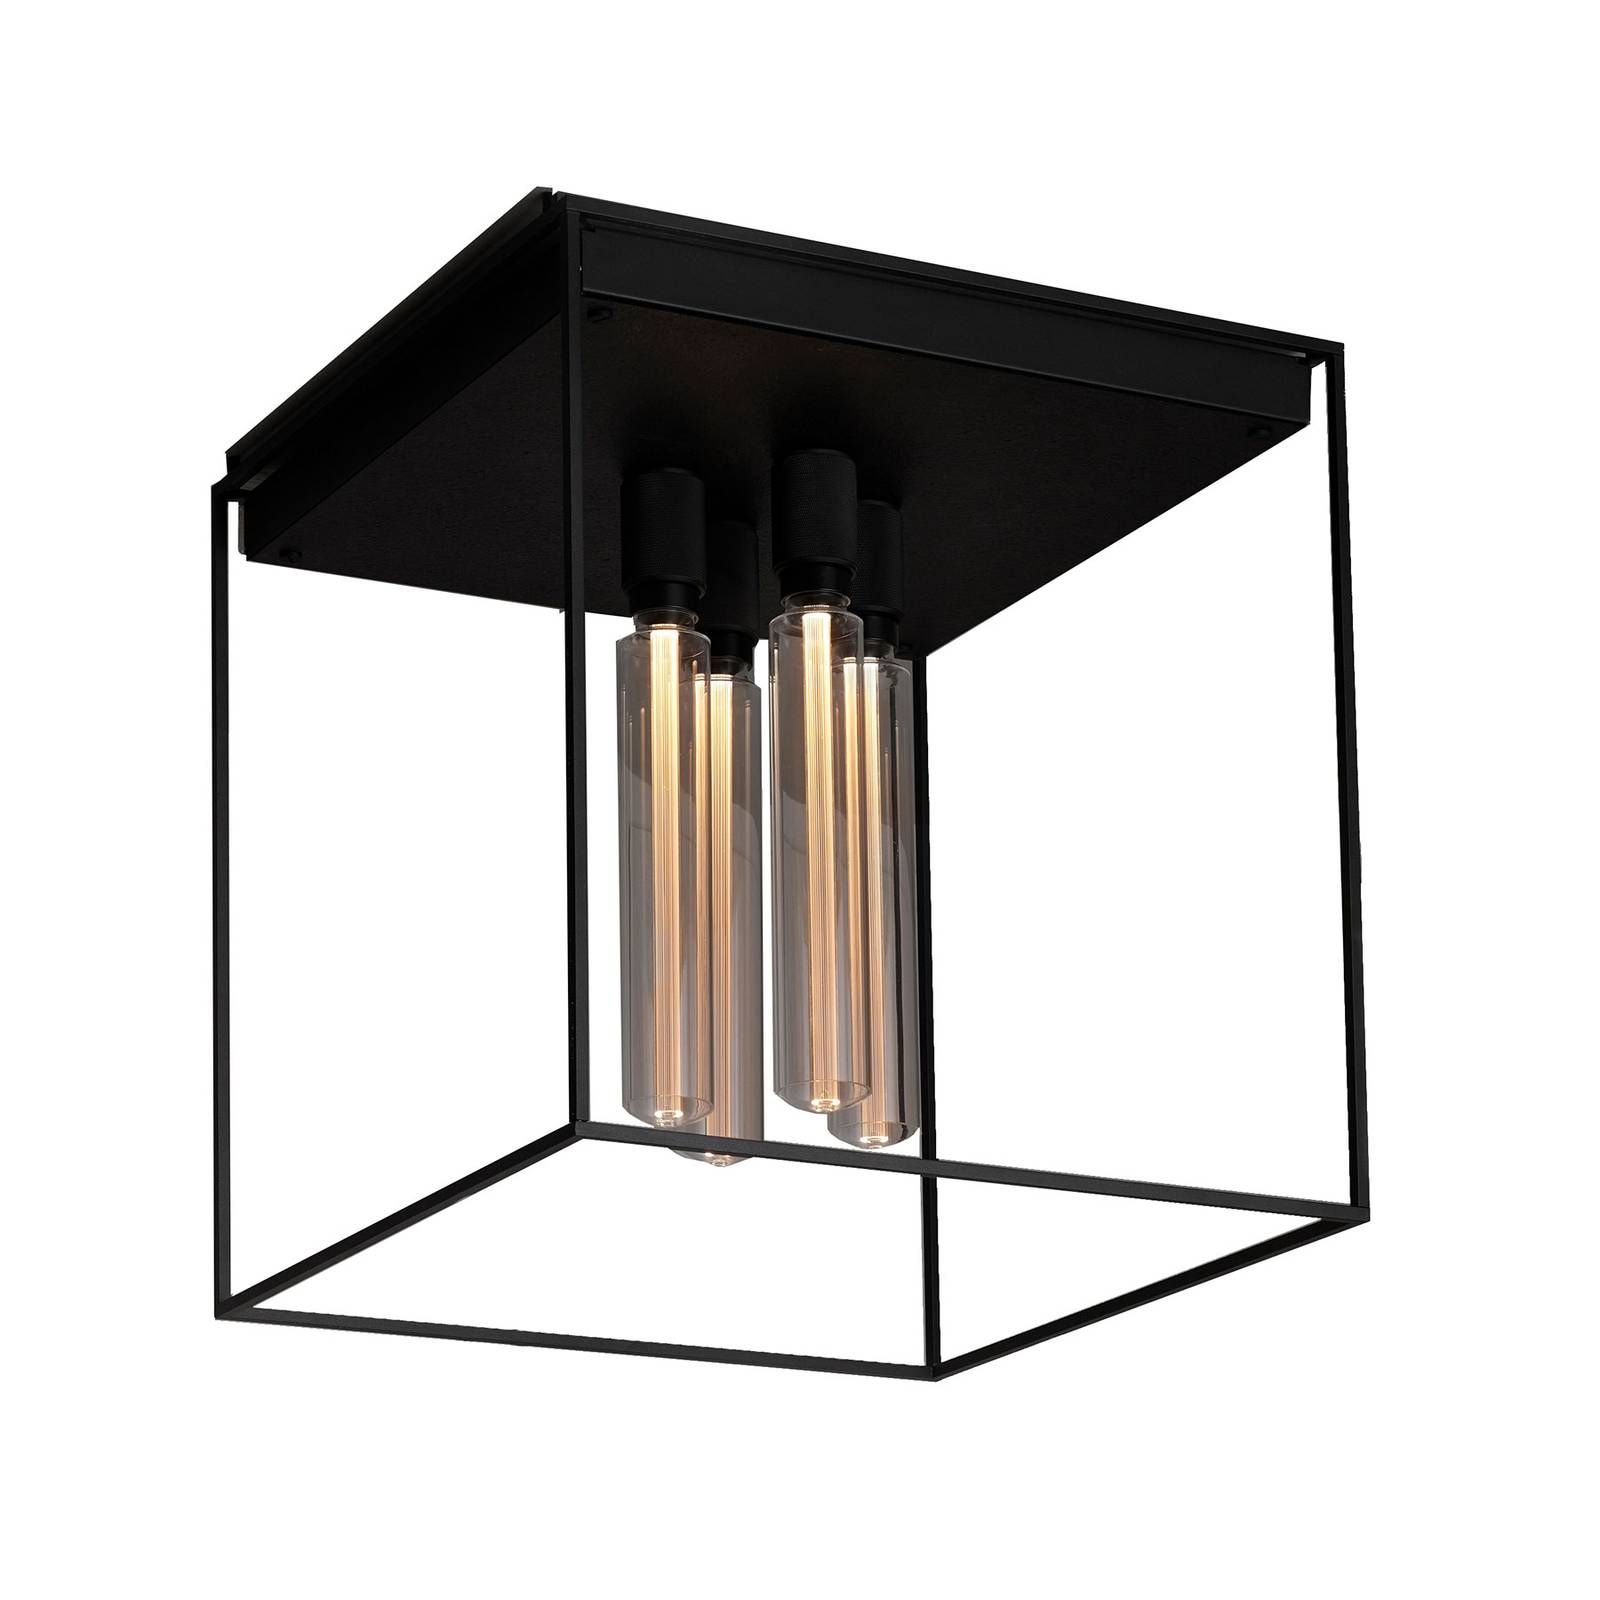 Buster + Punch Caged Ceiling 4.0 LED Marmor black von Buster + Punch